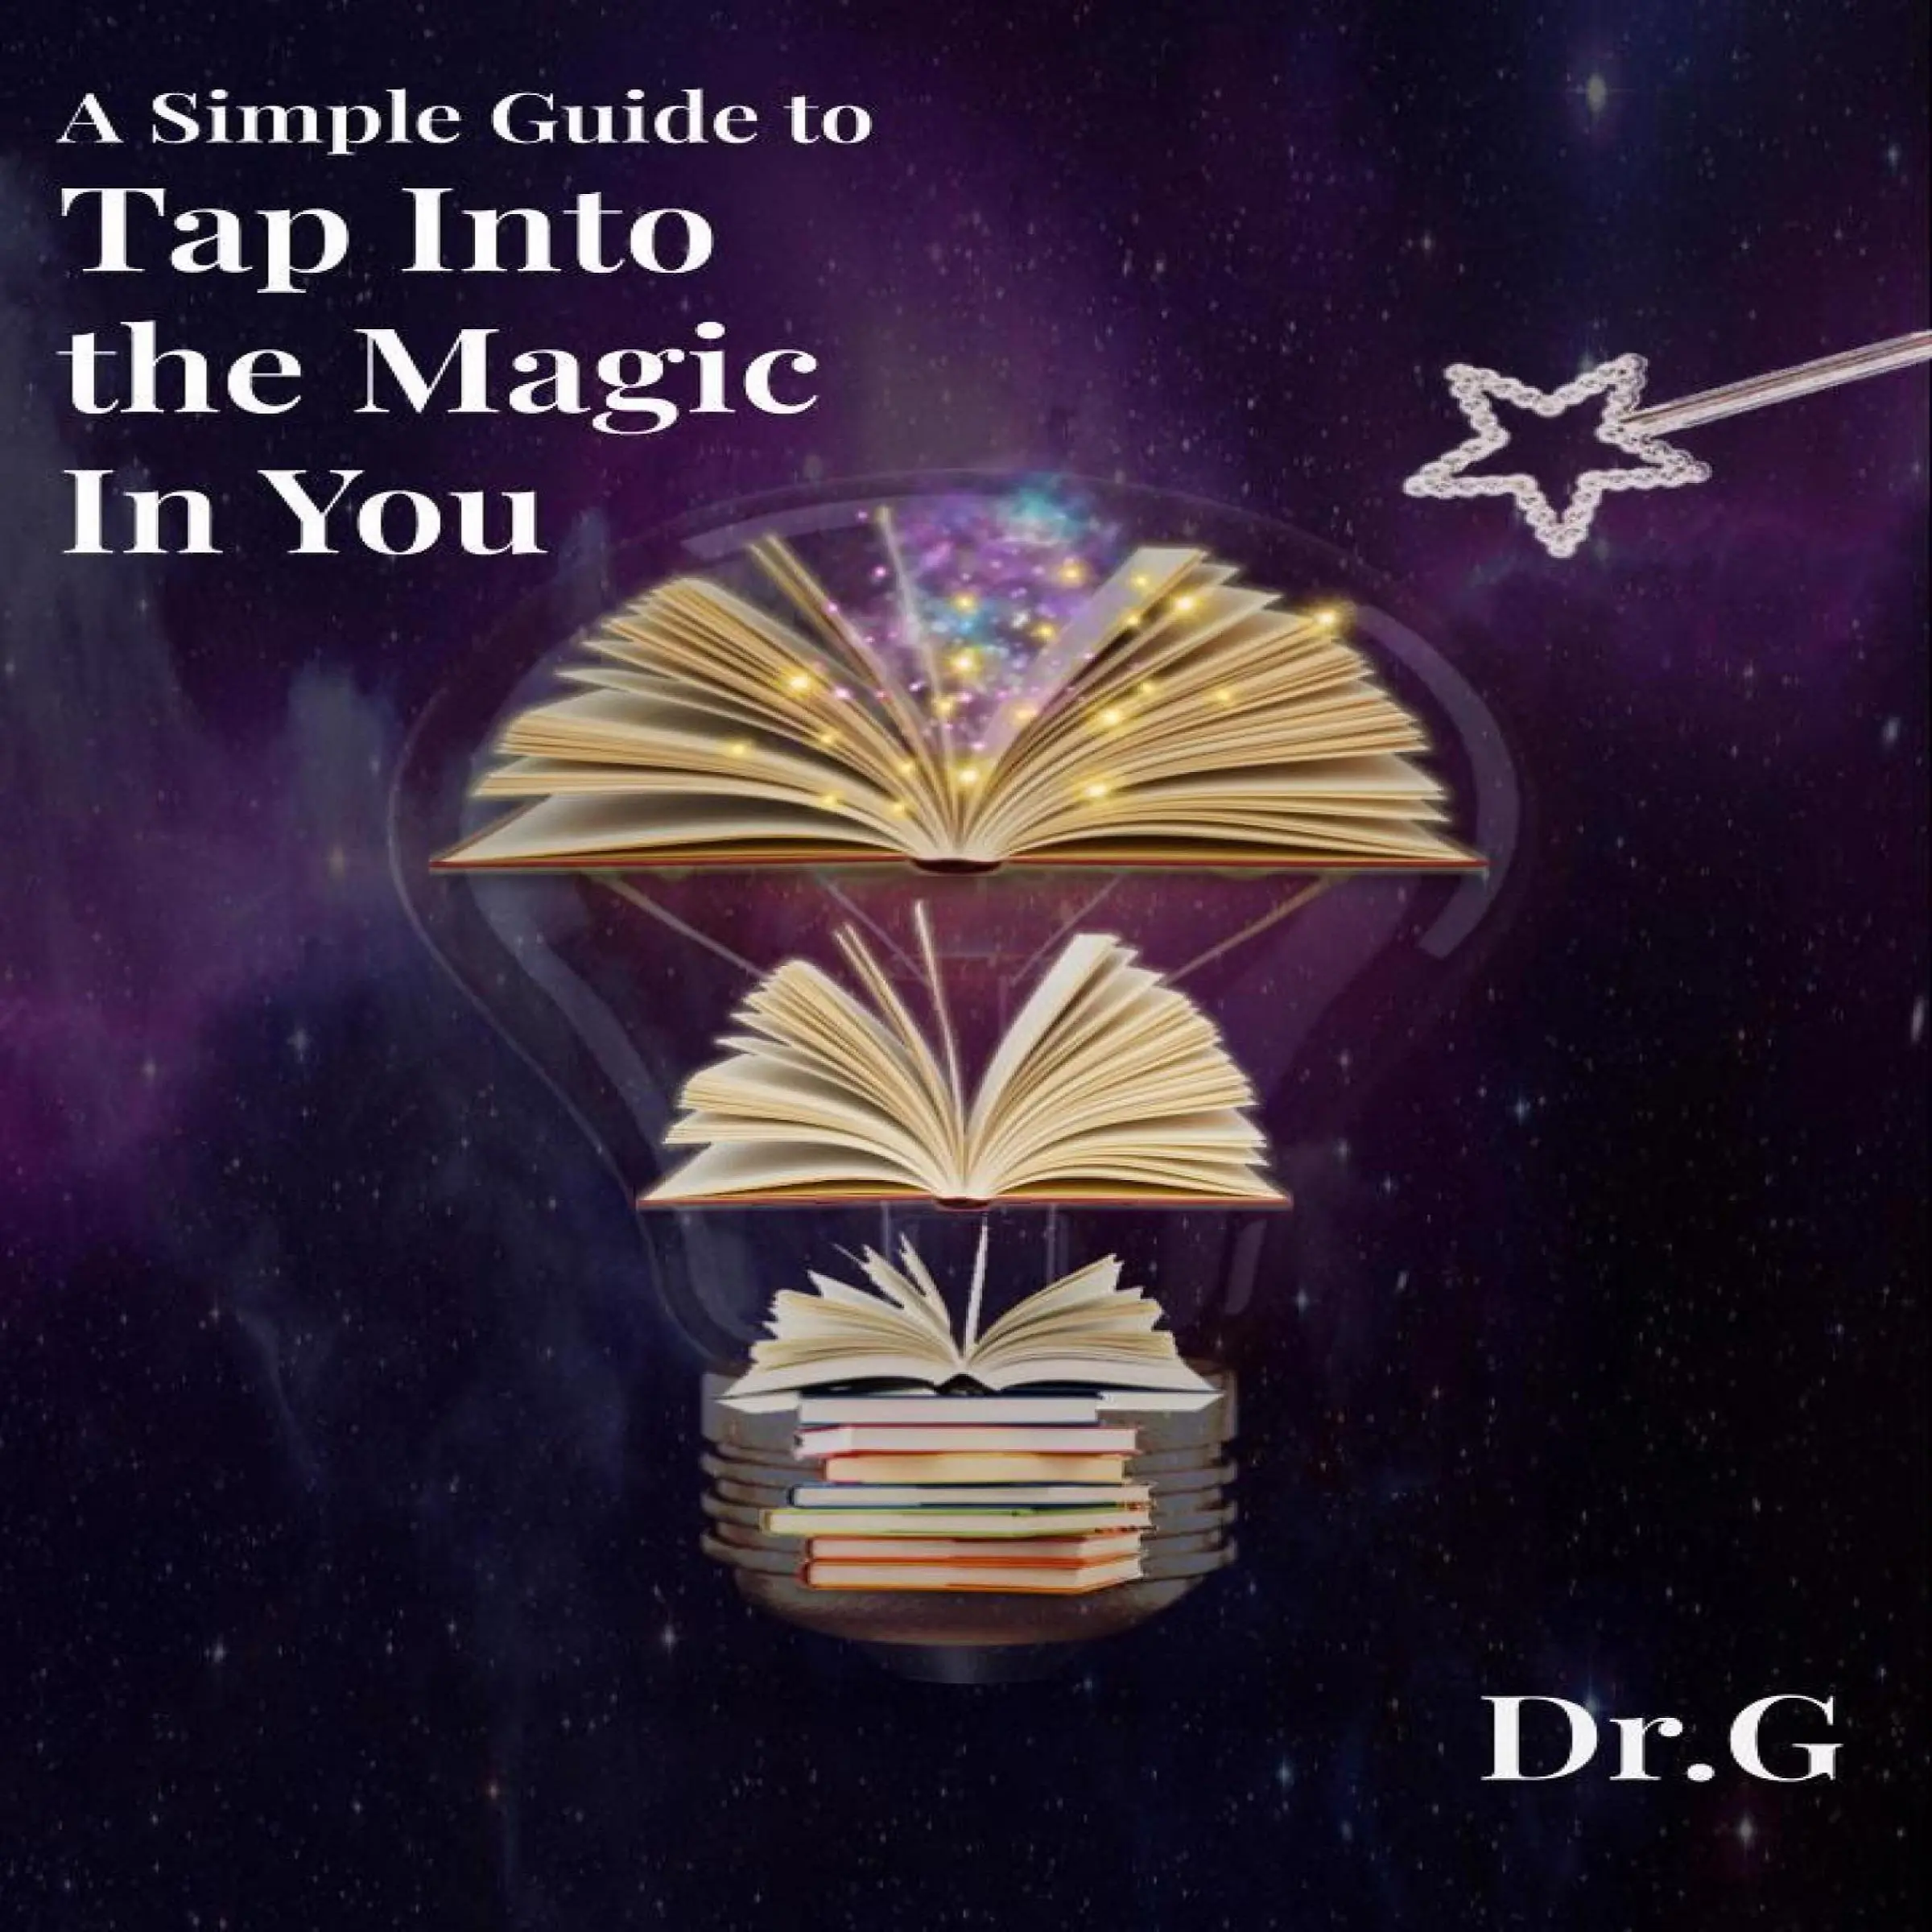 A Simple Guide to Tap Into the Magic in You Audiobook by Dr. G